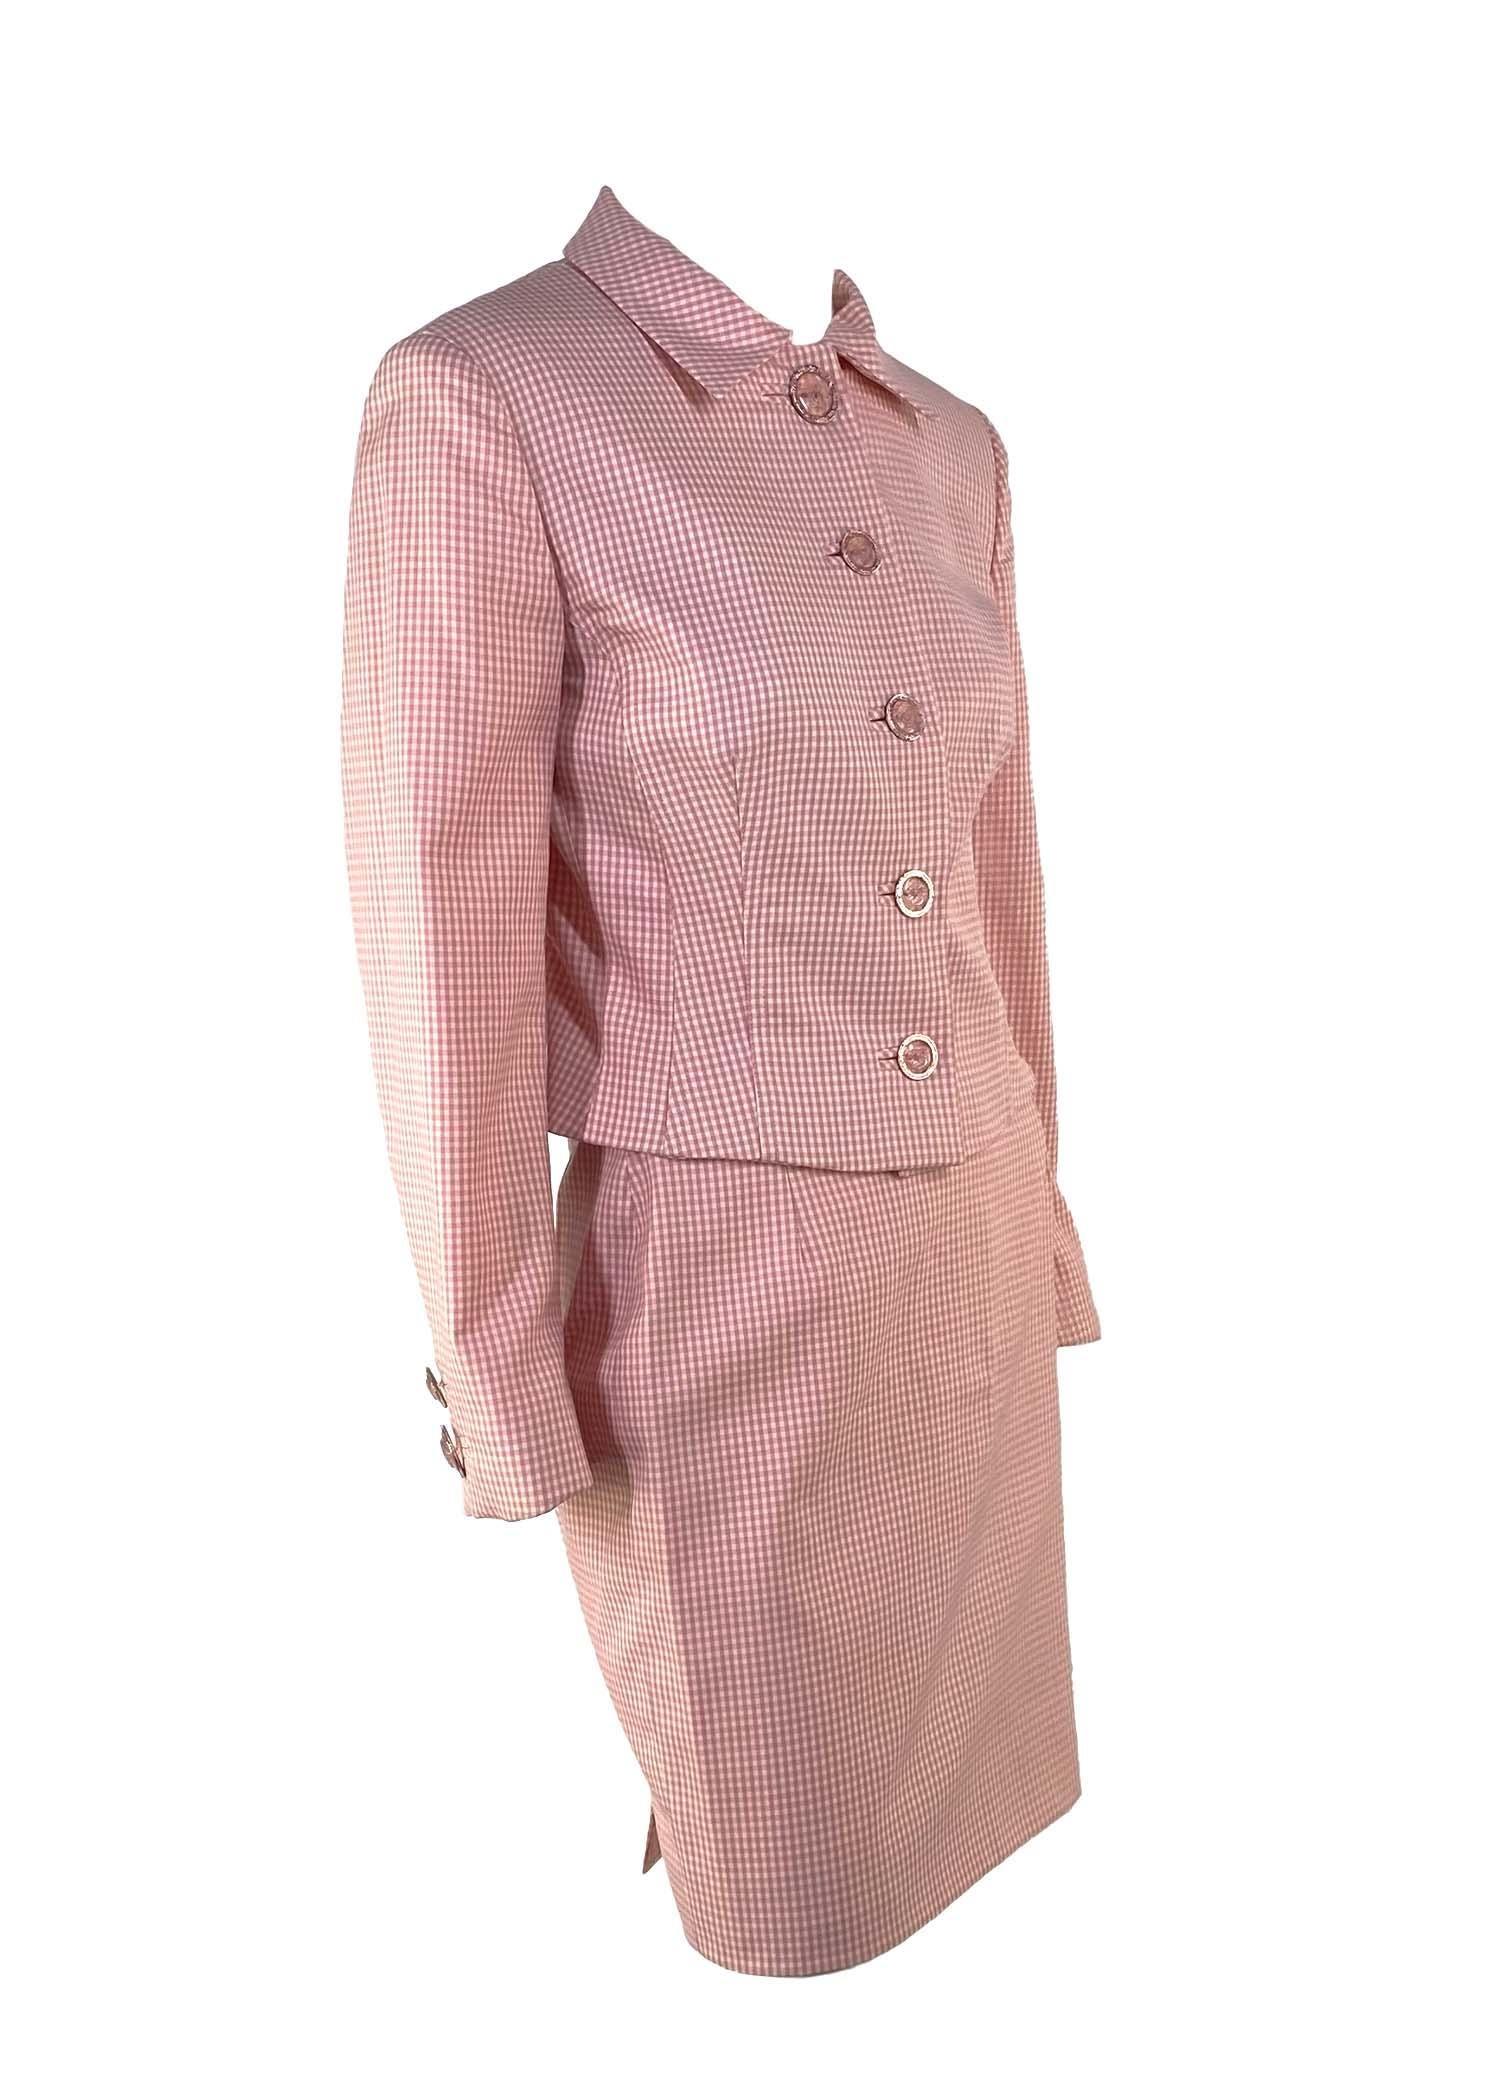 S/S 1995 Gianni Versace Couture Runway Pink Gingham Runway Skirt Suit  In Good Condition For Sale In West Hollywood, CA